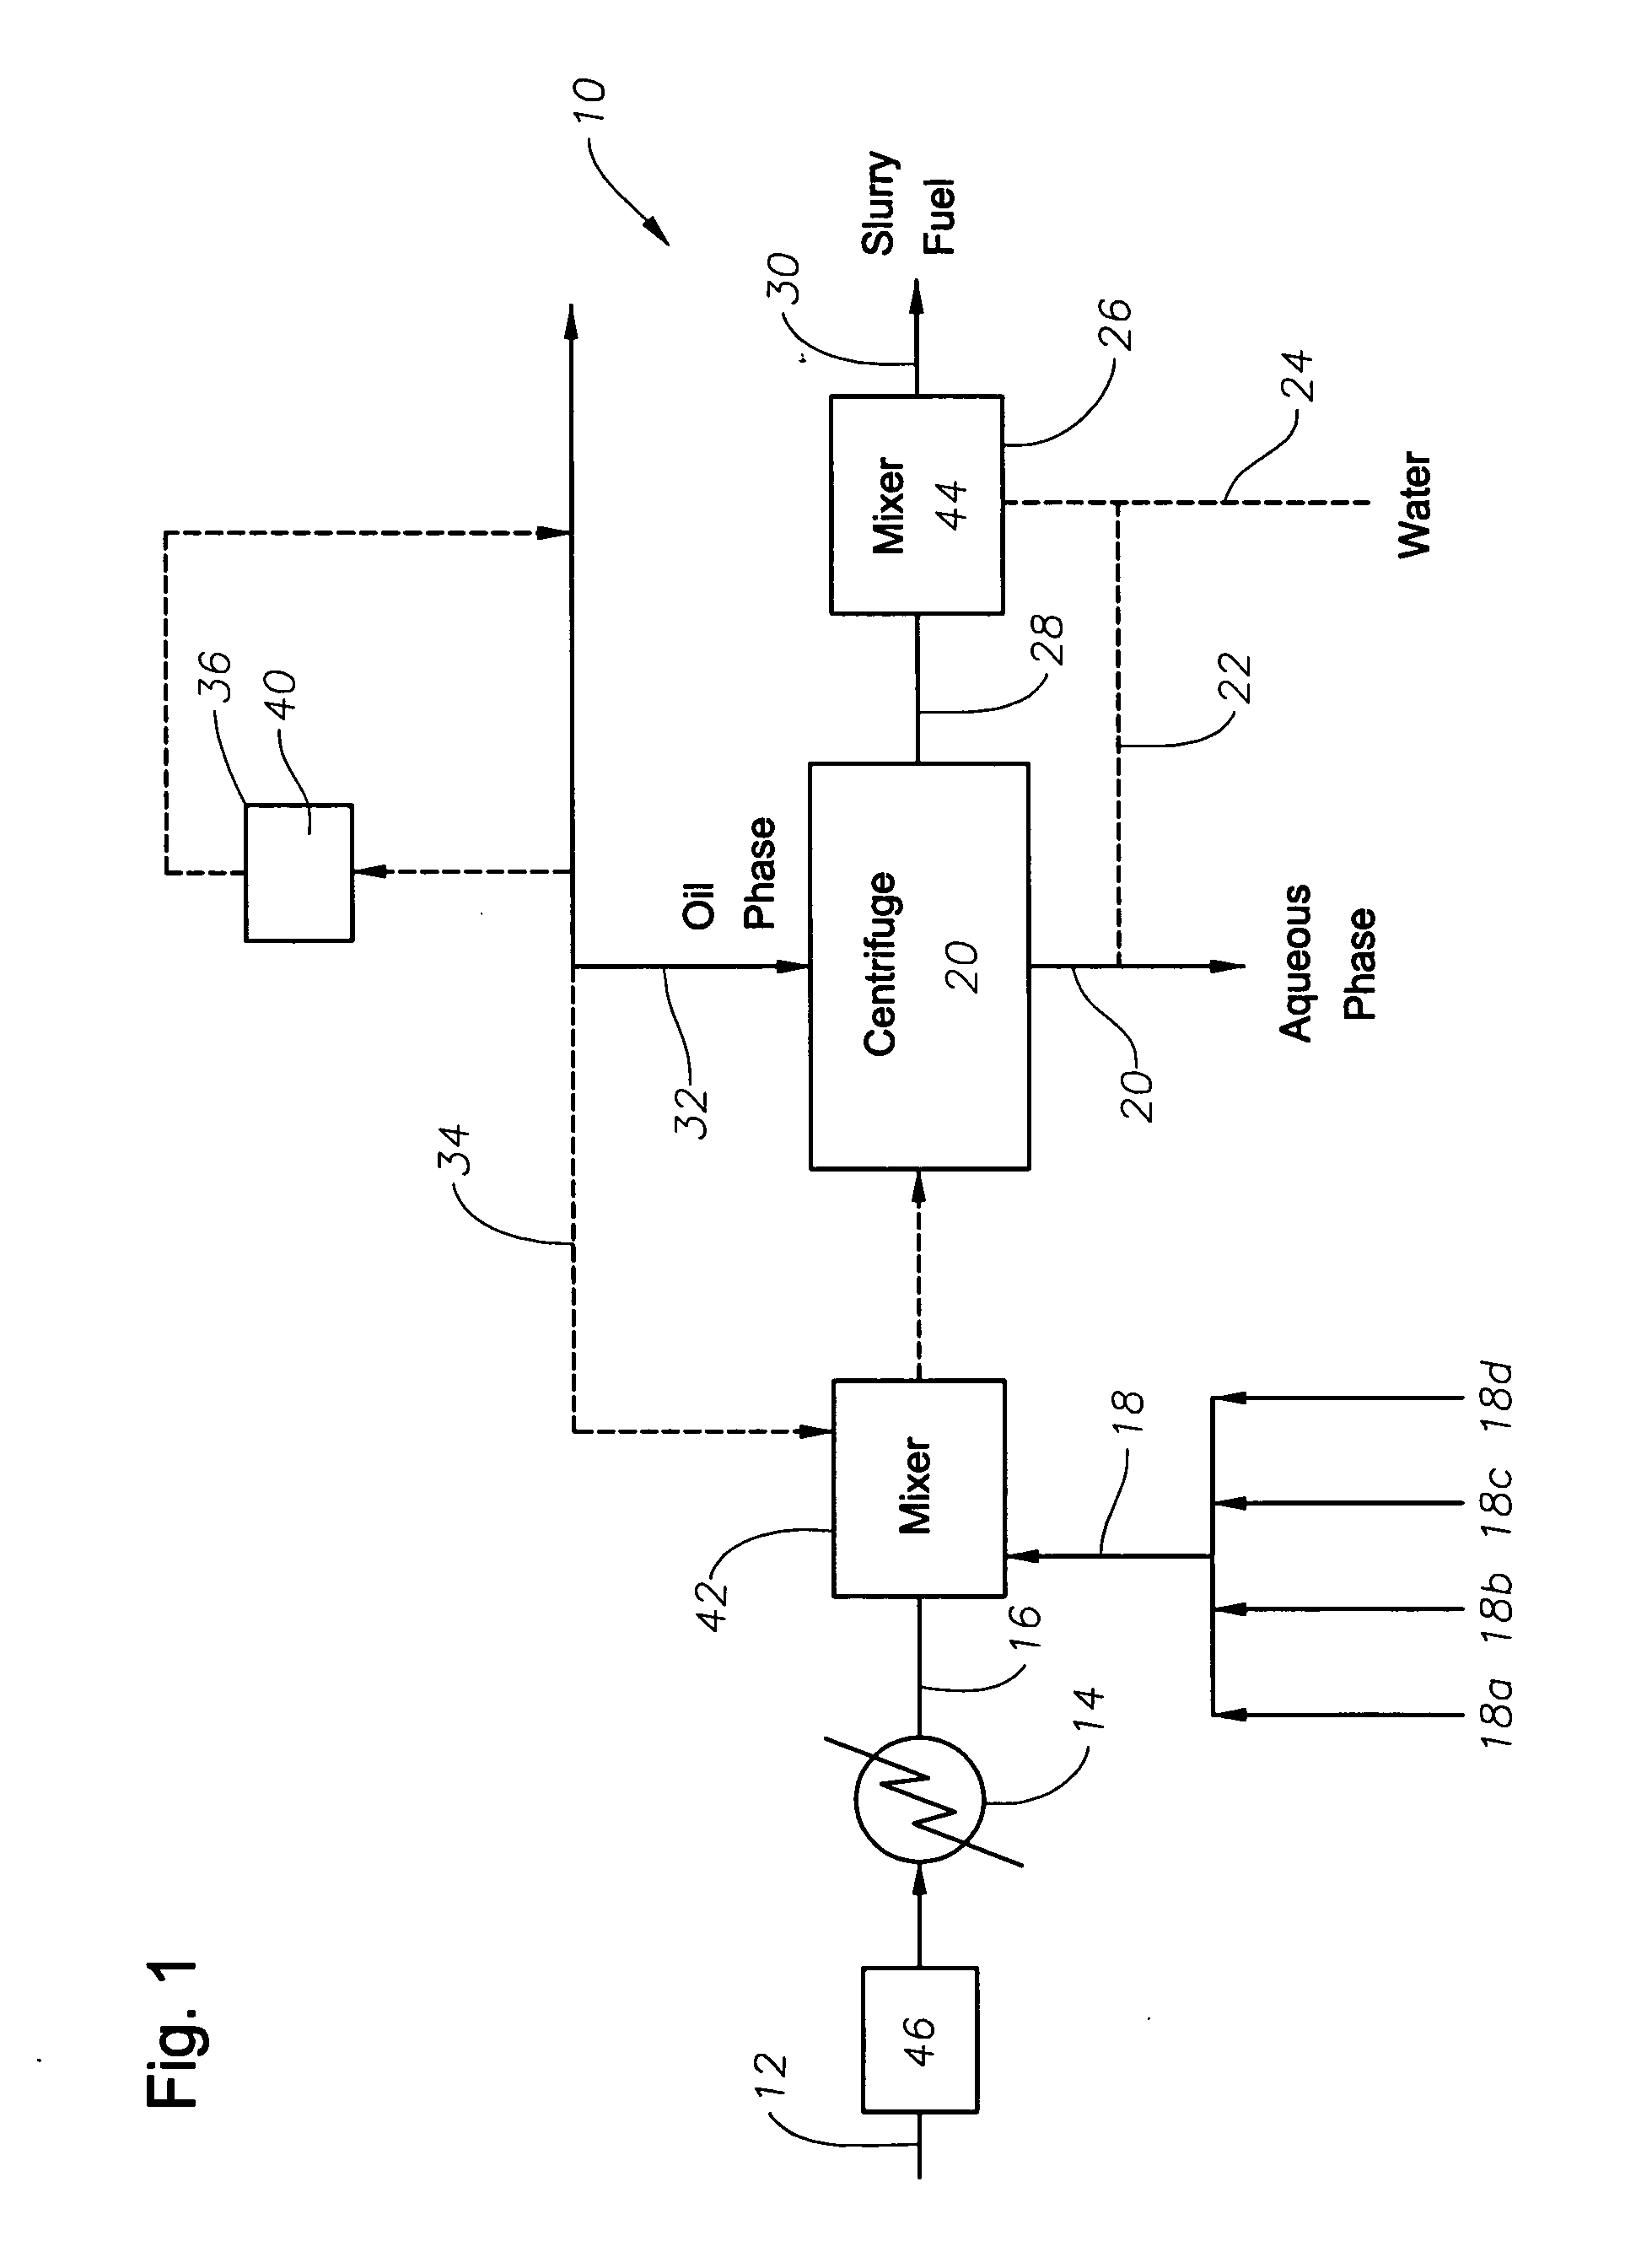 Method for utilizing hydrocarbon waste materials as fuel and feedstock